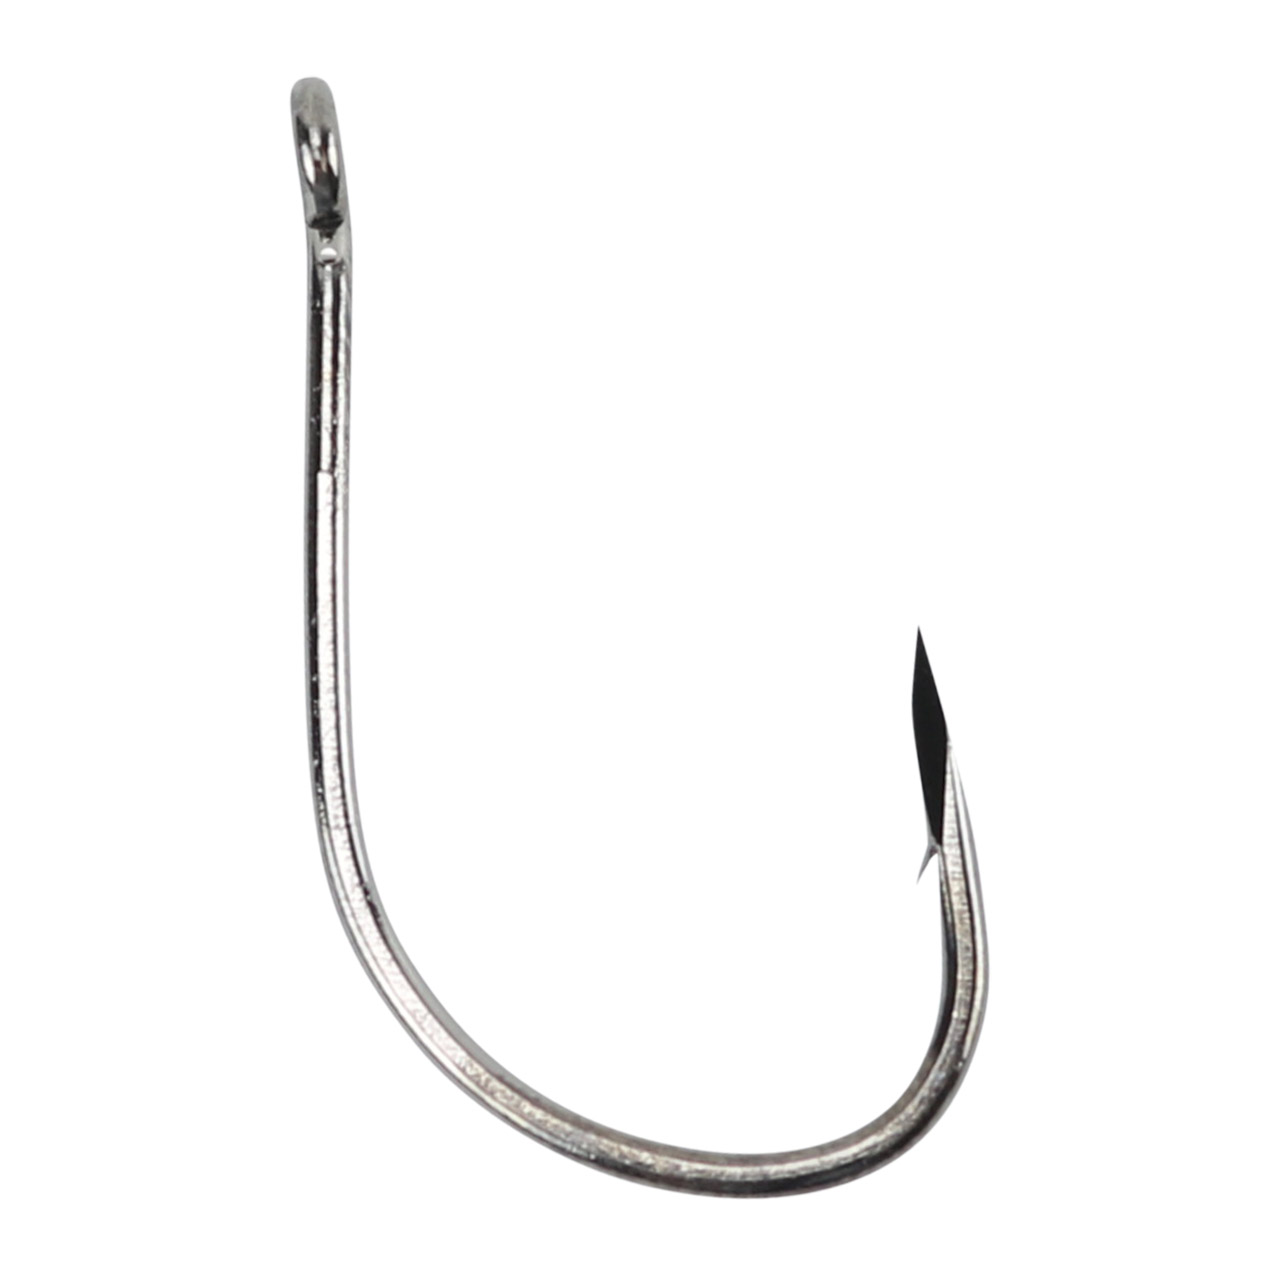 What do these hooks do? New to drop-shotting and usually use octopus hooks  but saw these at Walmart and liked the shape : r/FishingForBeginners